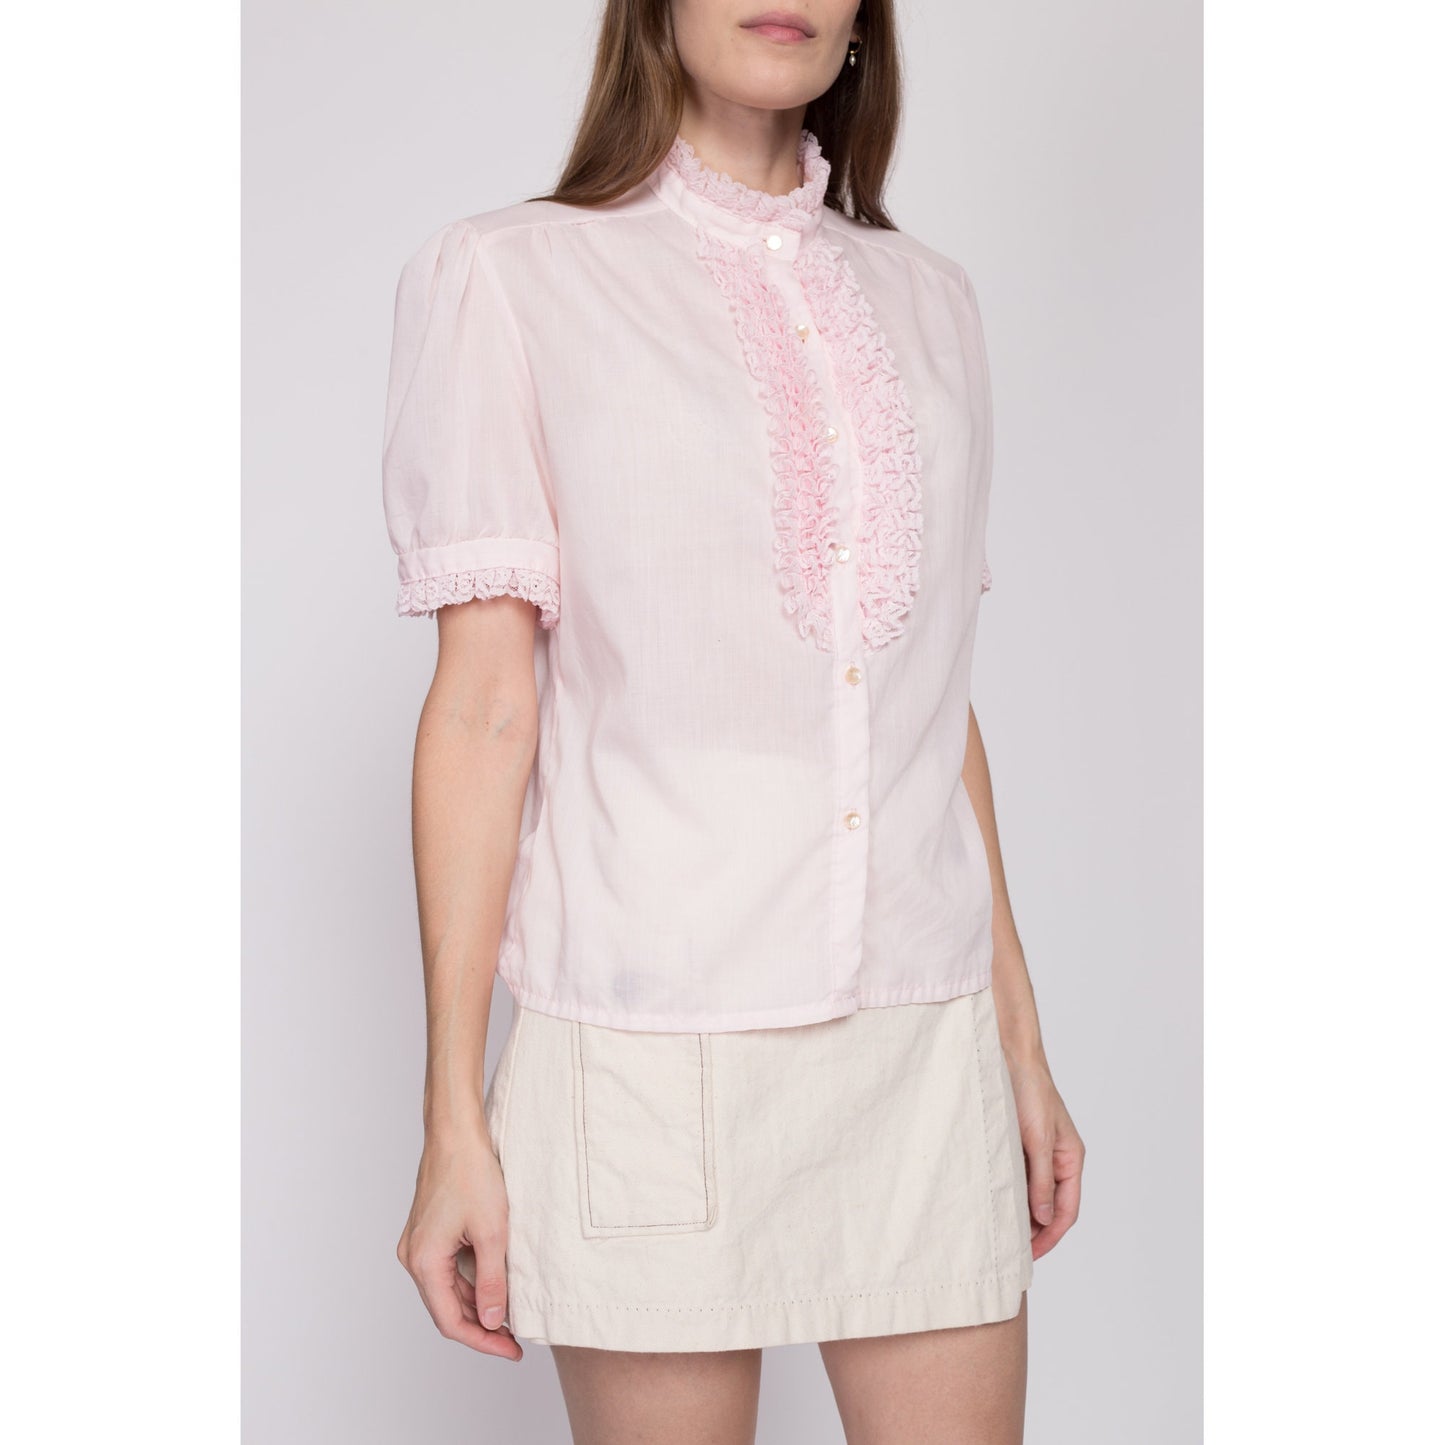 L| 70s Baby Pink Tuxedo Ruffle Blouse - Large | Vintage Boho Short Sleeve Button Up Prairie Top